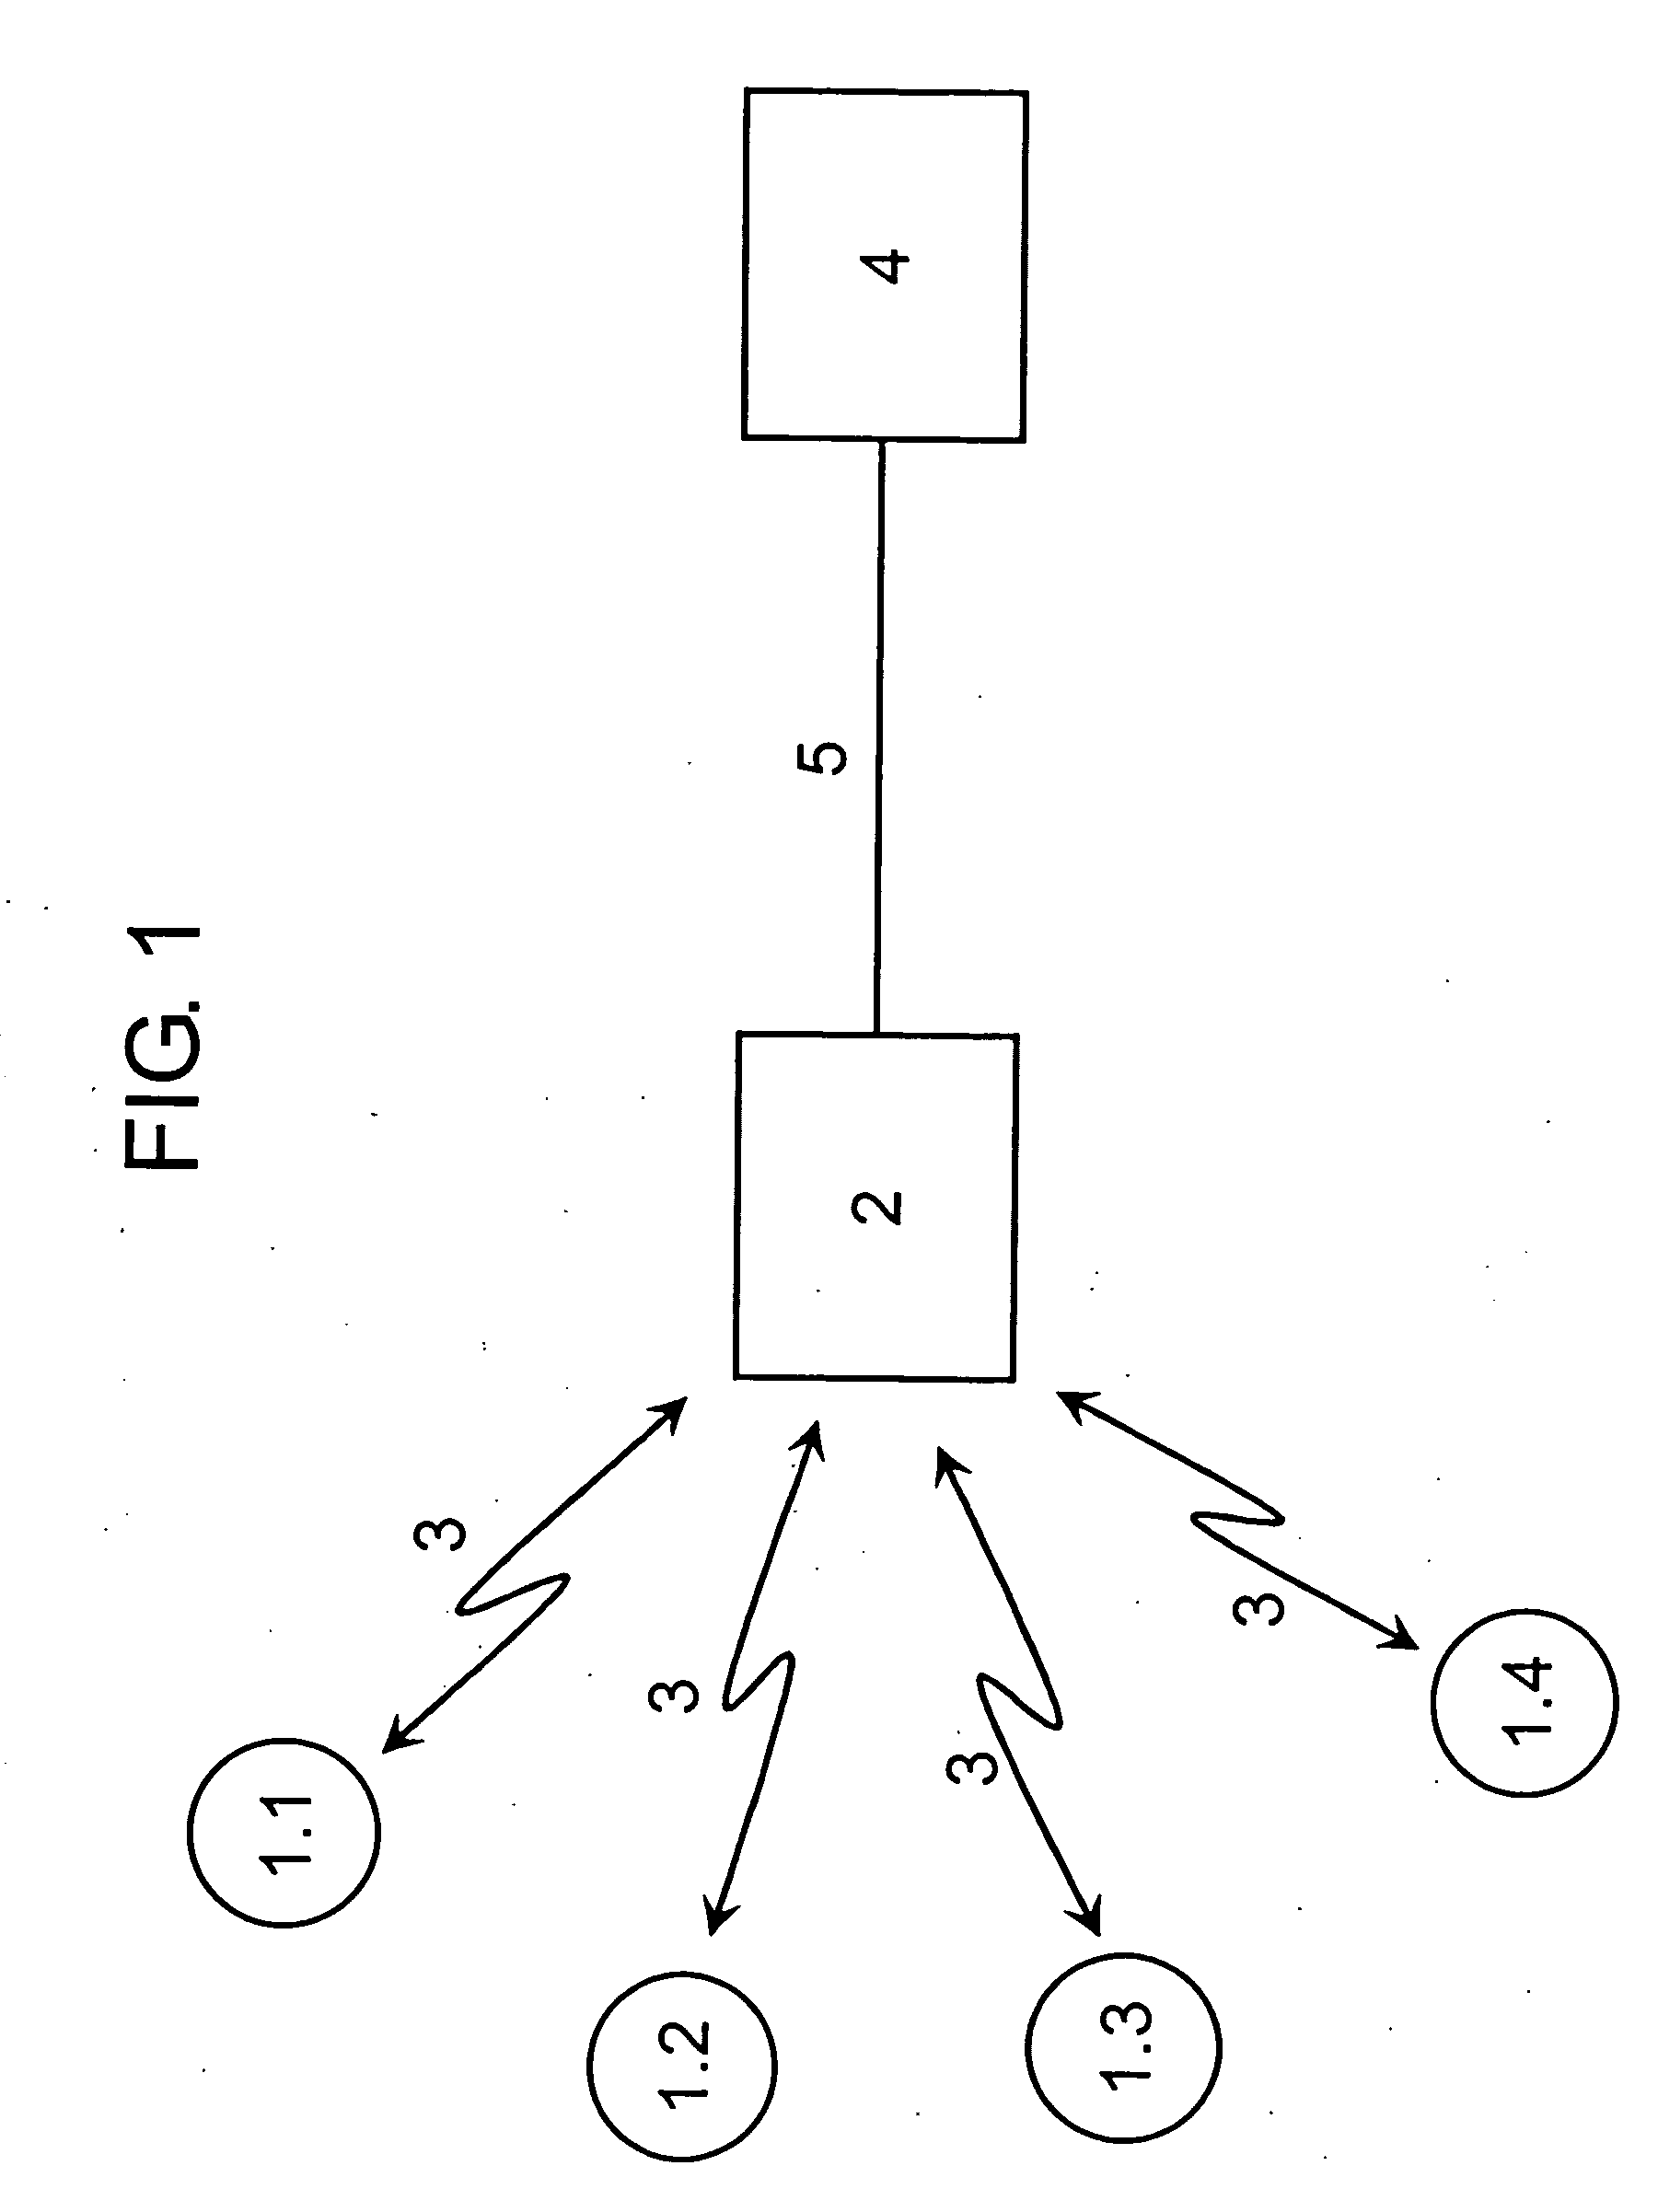 Method for authentication